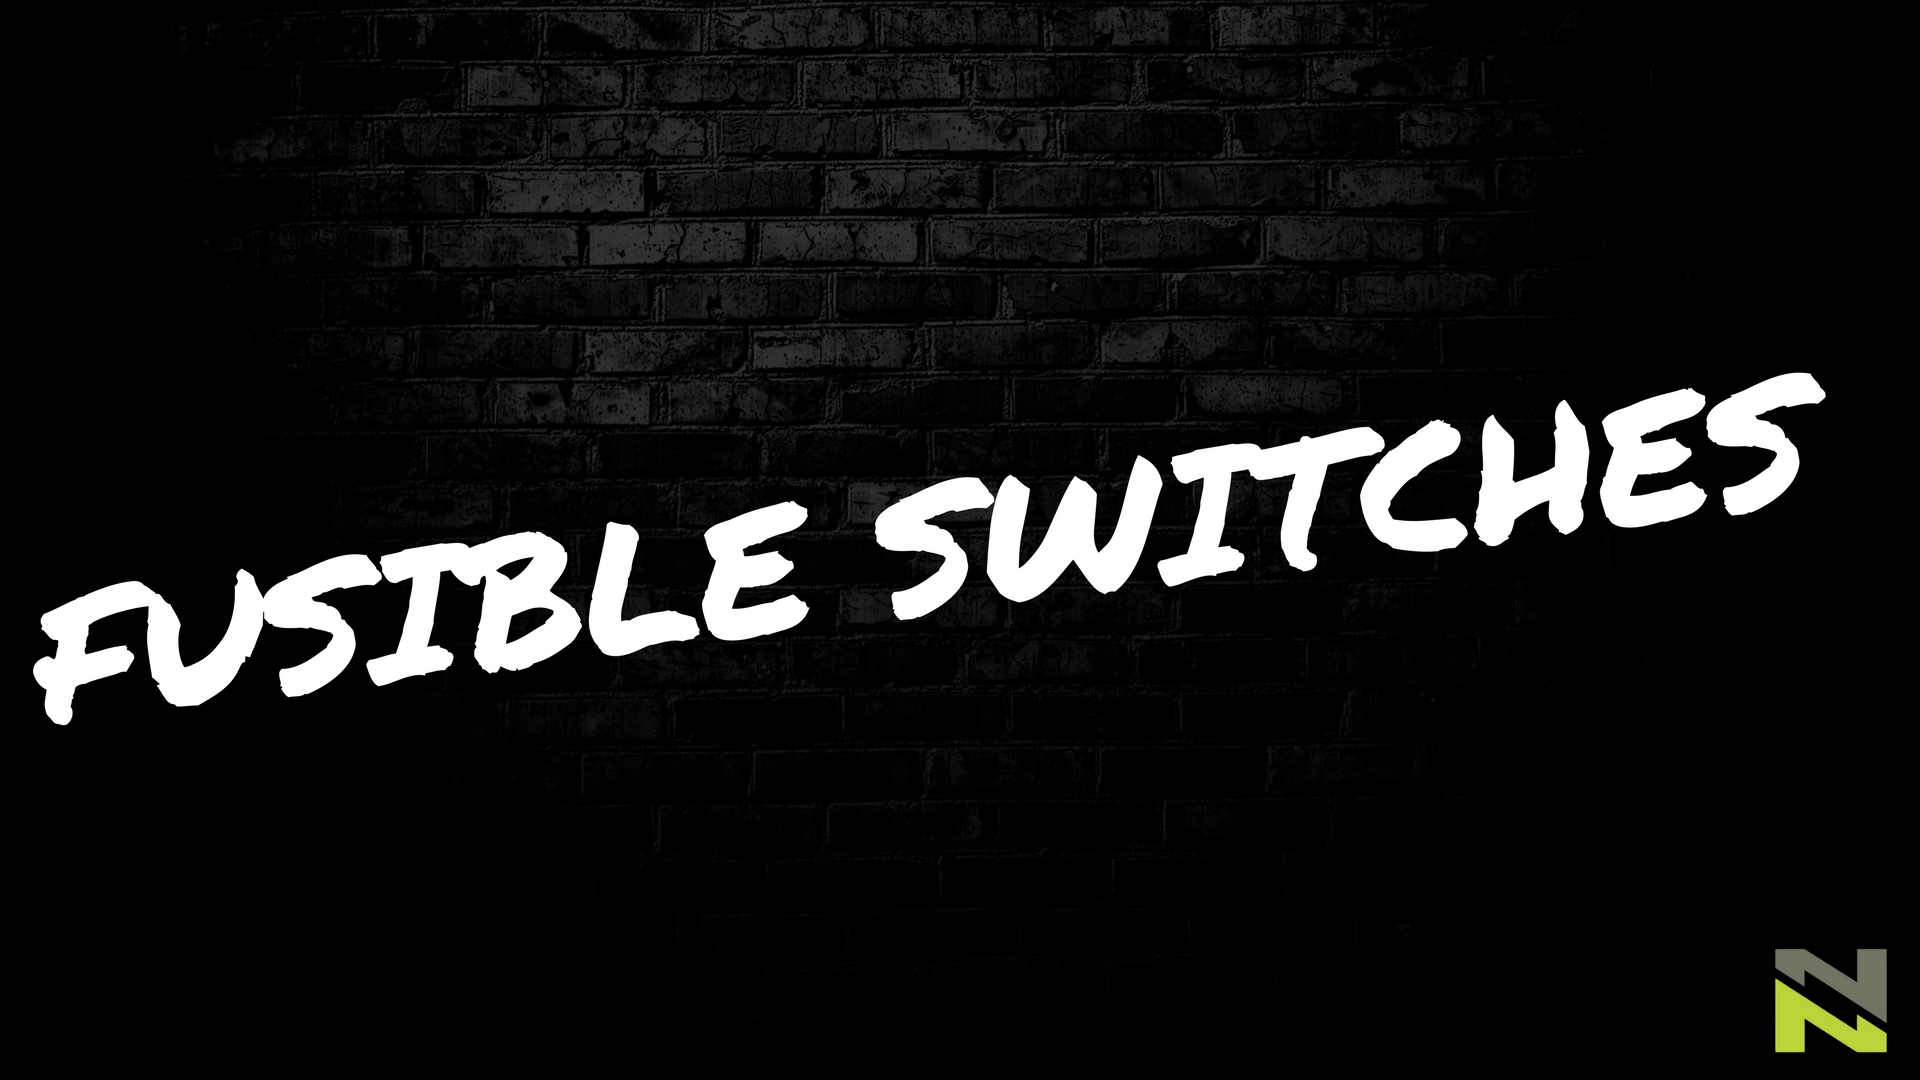 Fusible Switches